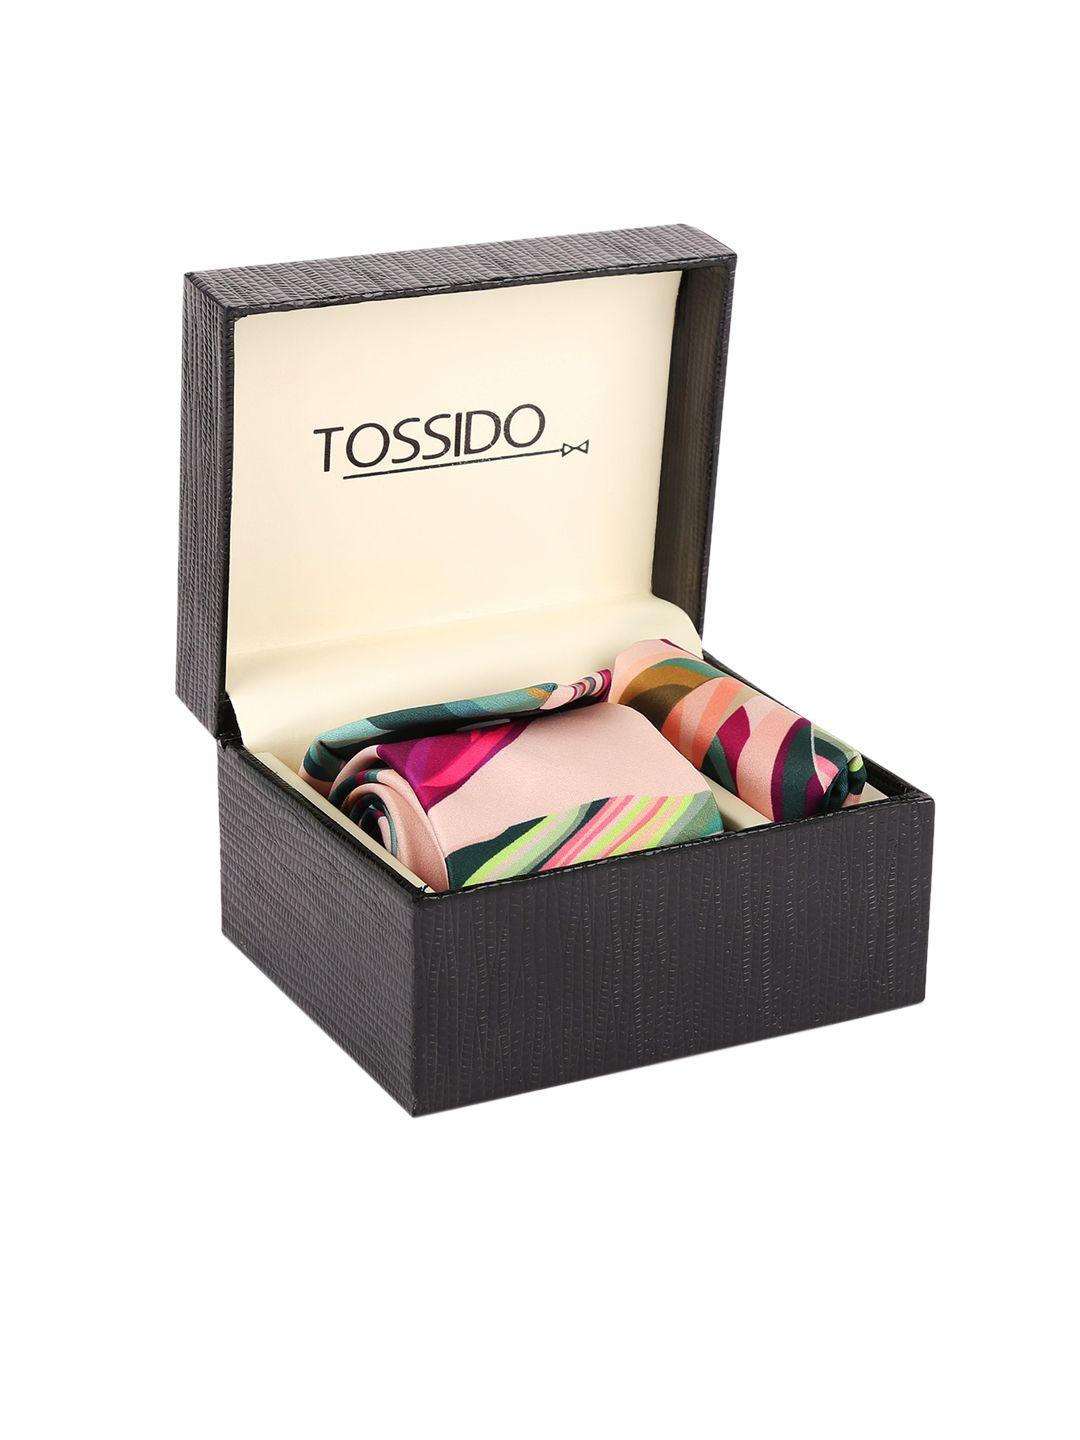 tossido men pink & green printed accessory gift set